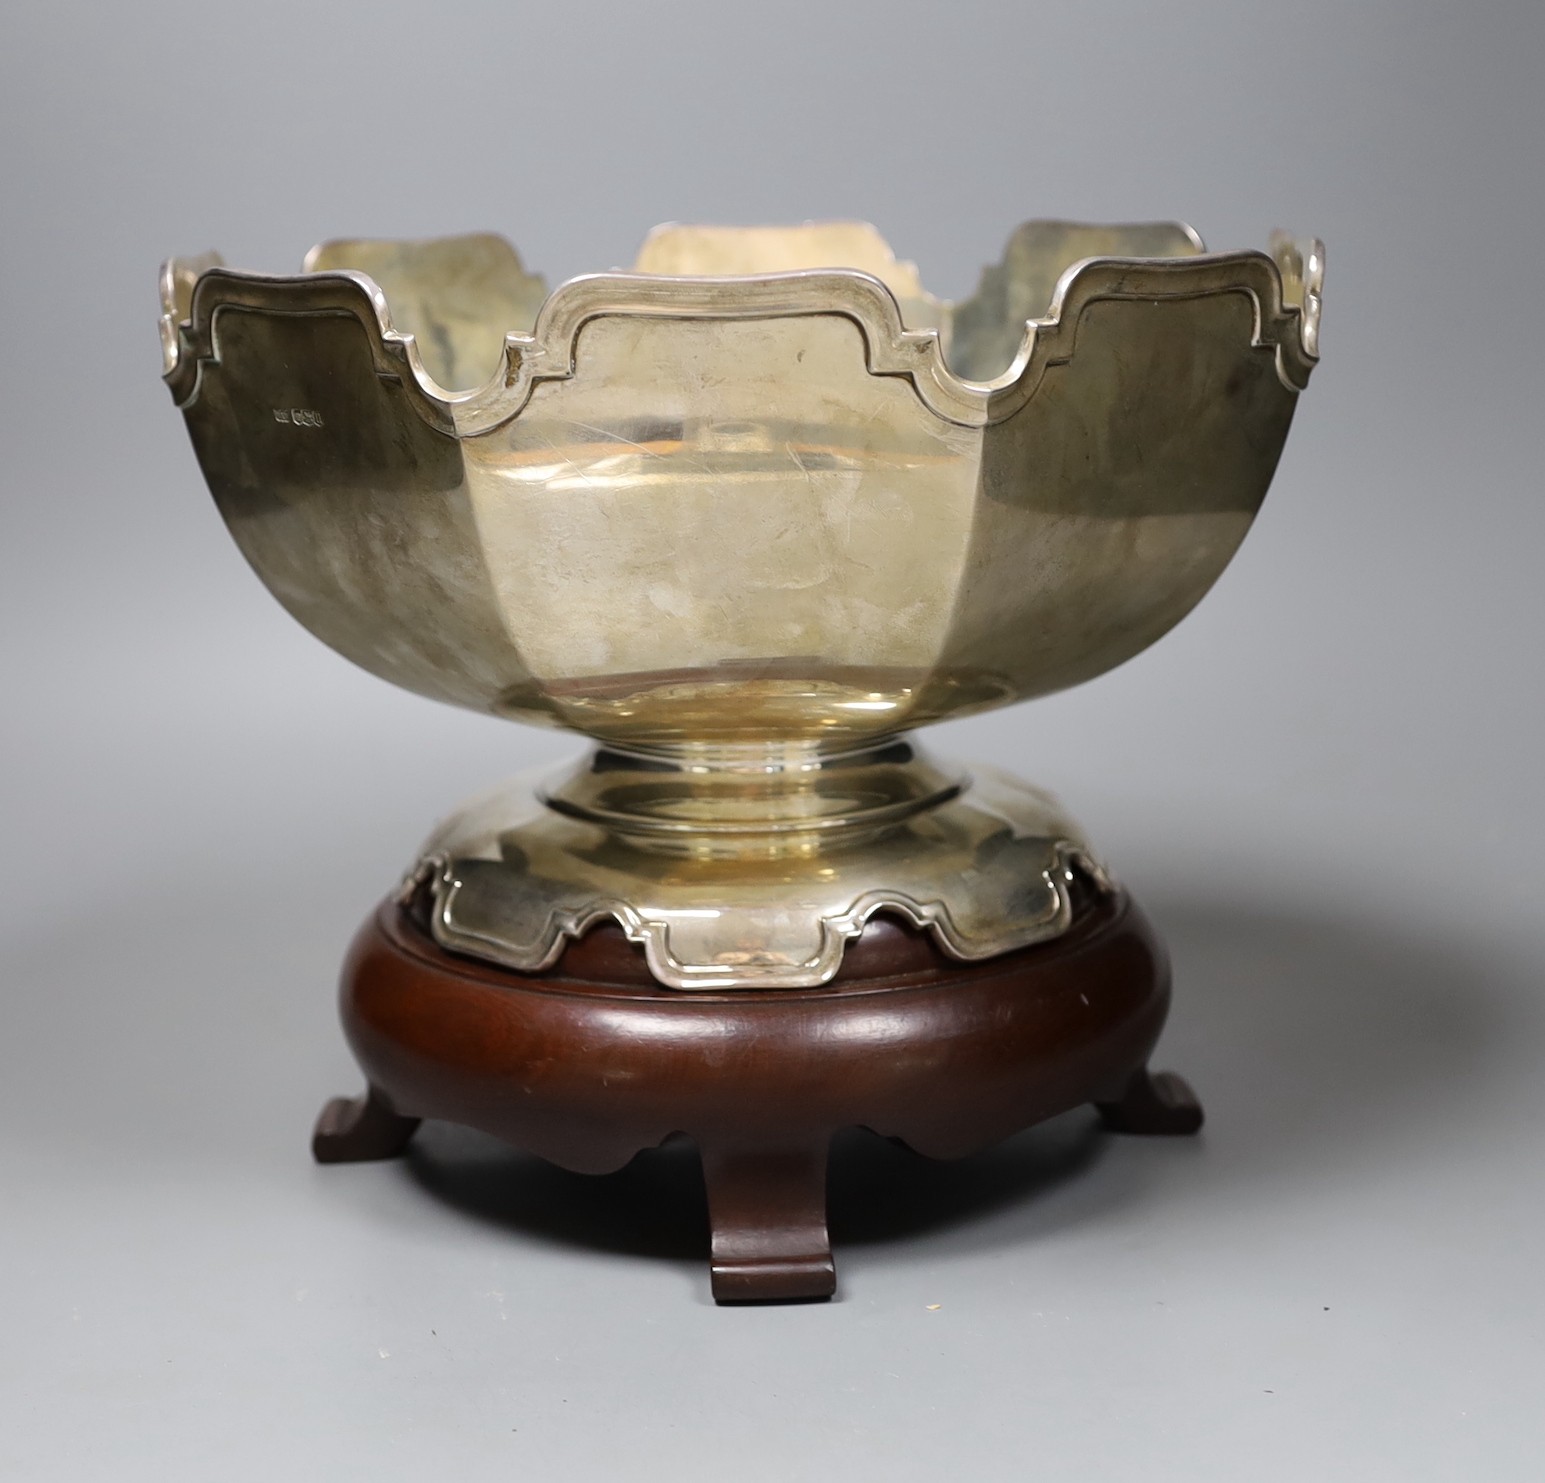 A George VI silver rose bowl, makers Mappin & Webb, Sheffield 1937, diameter 26cm, 38 oz., with original wooden plinth                                                                                                      